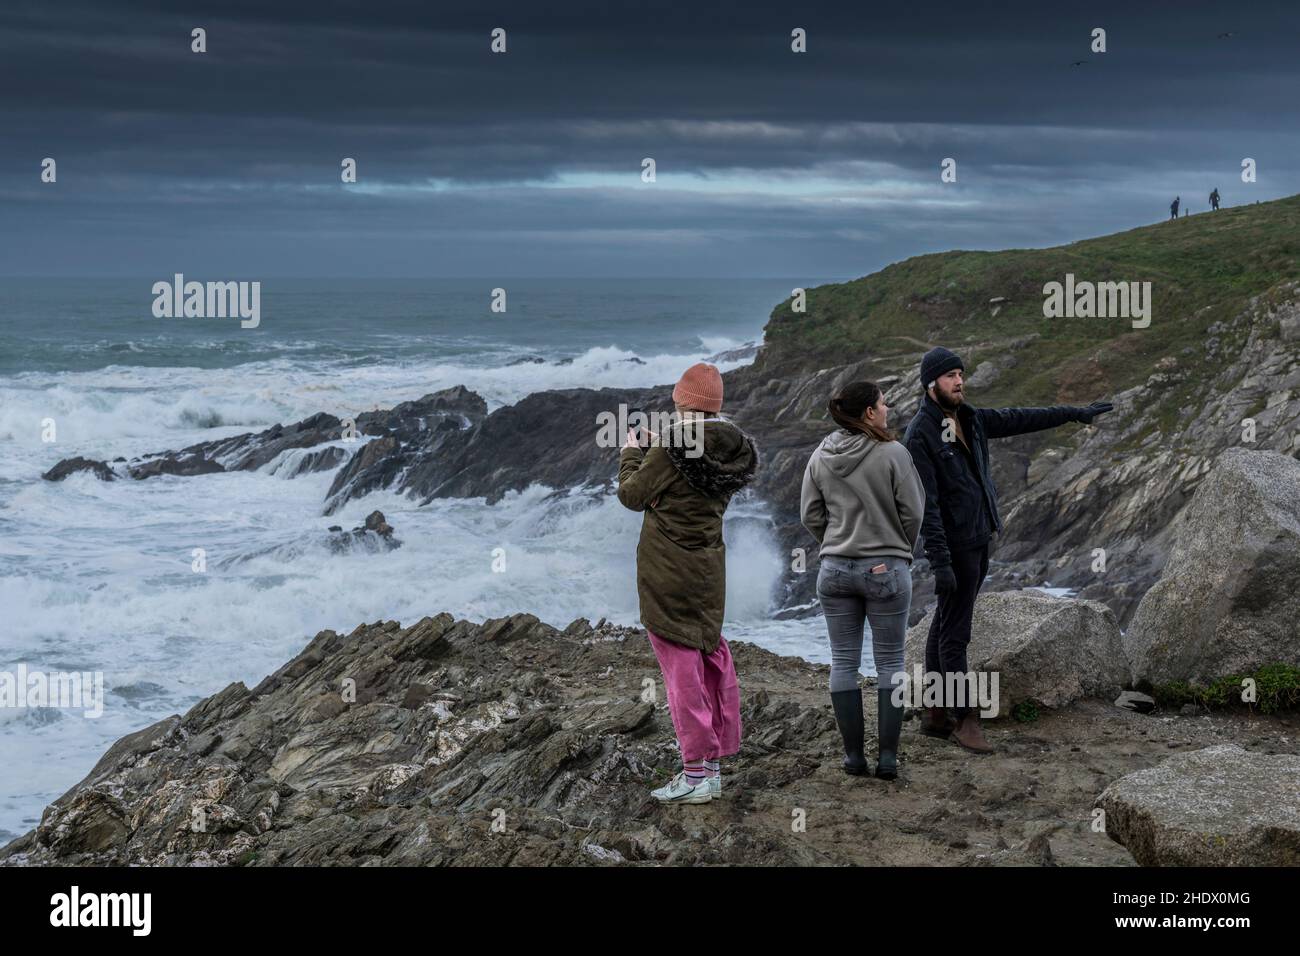 People visiting Towan Head in Newquay during windy weather conditions over the North Cornwall coast in the UK. Stock Photo